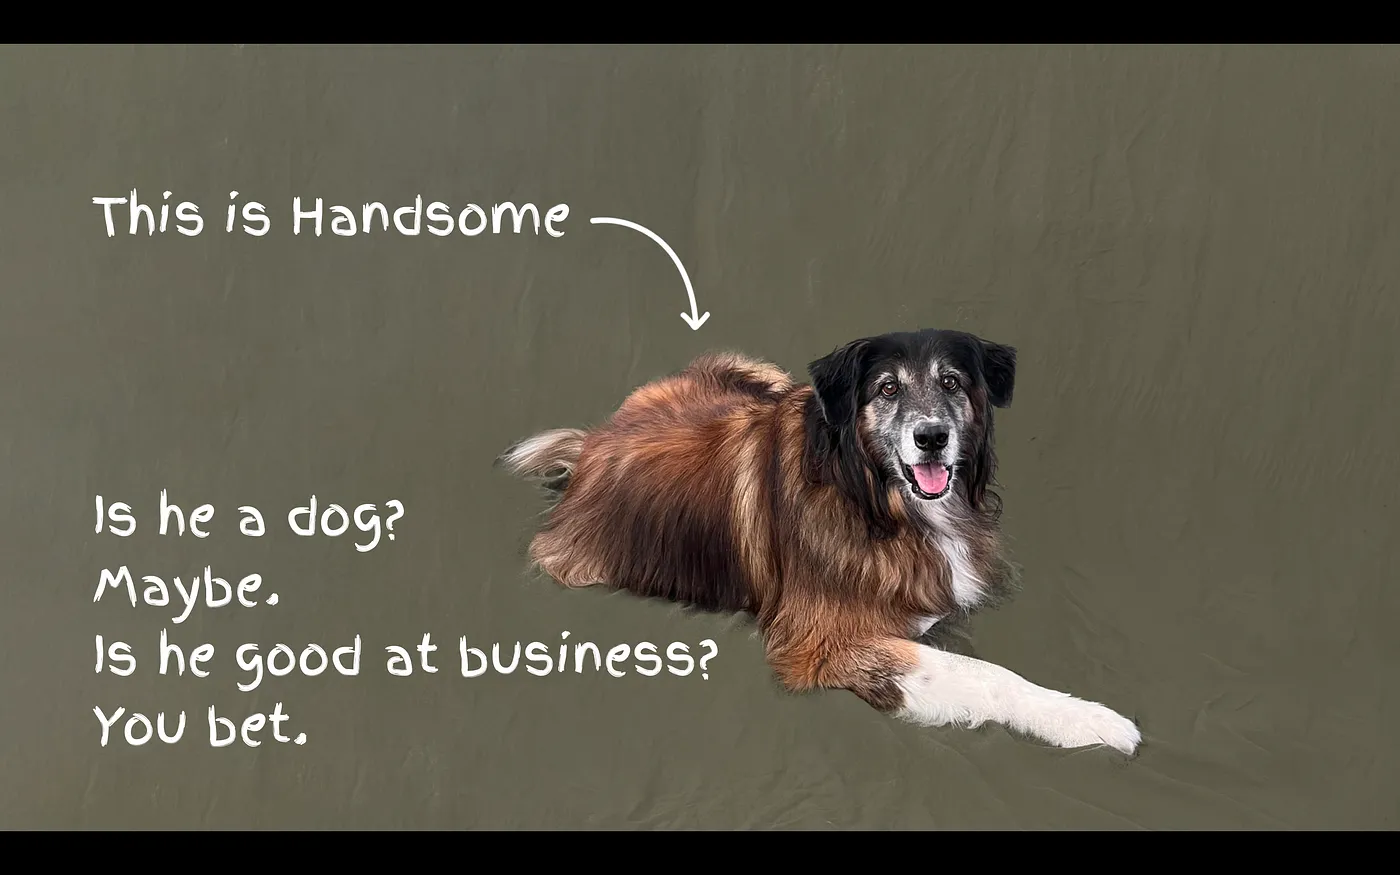 A meme about a dog who is good at business.